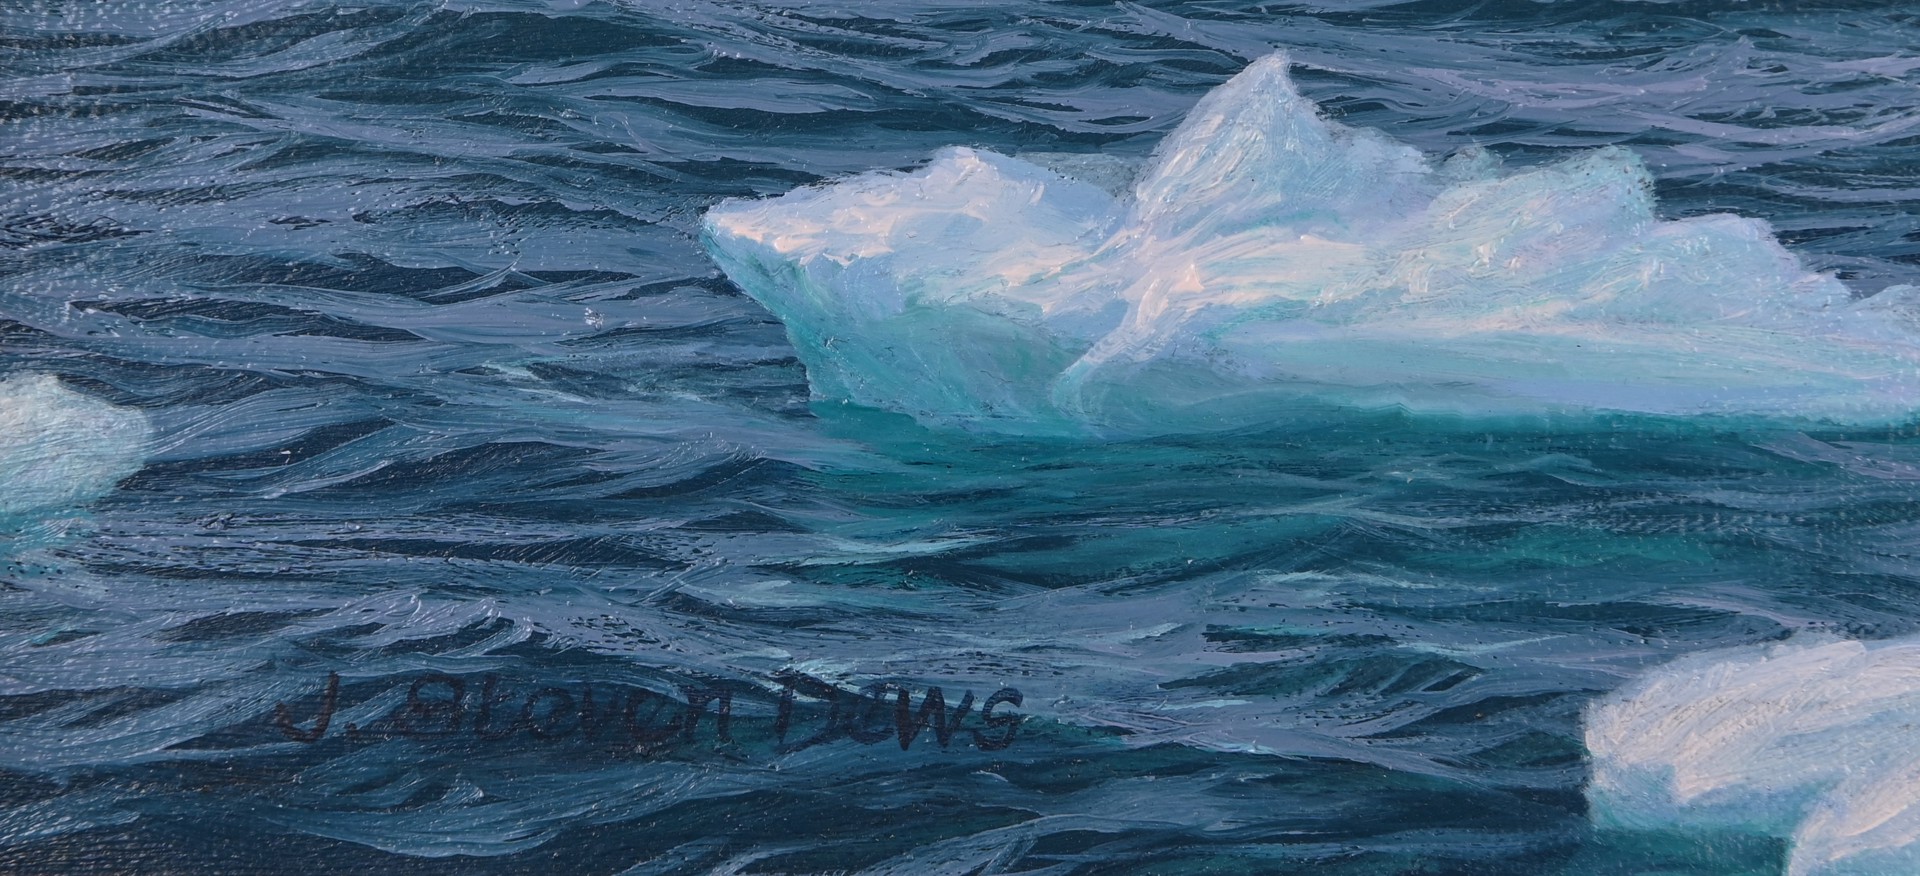 A Sailboat in the Artic by John Steven Dews